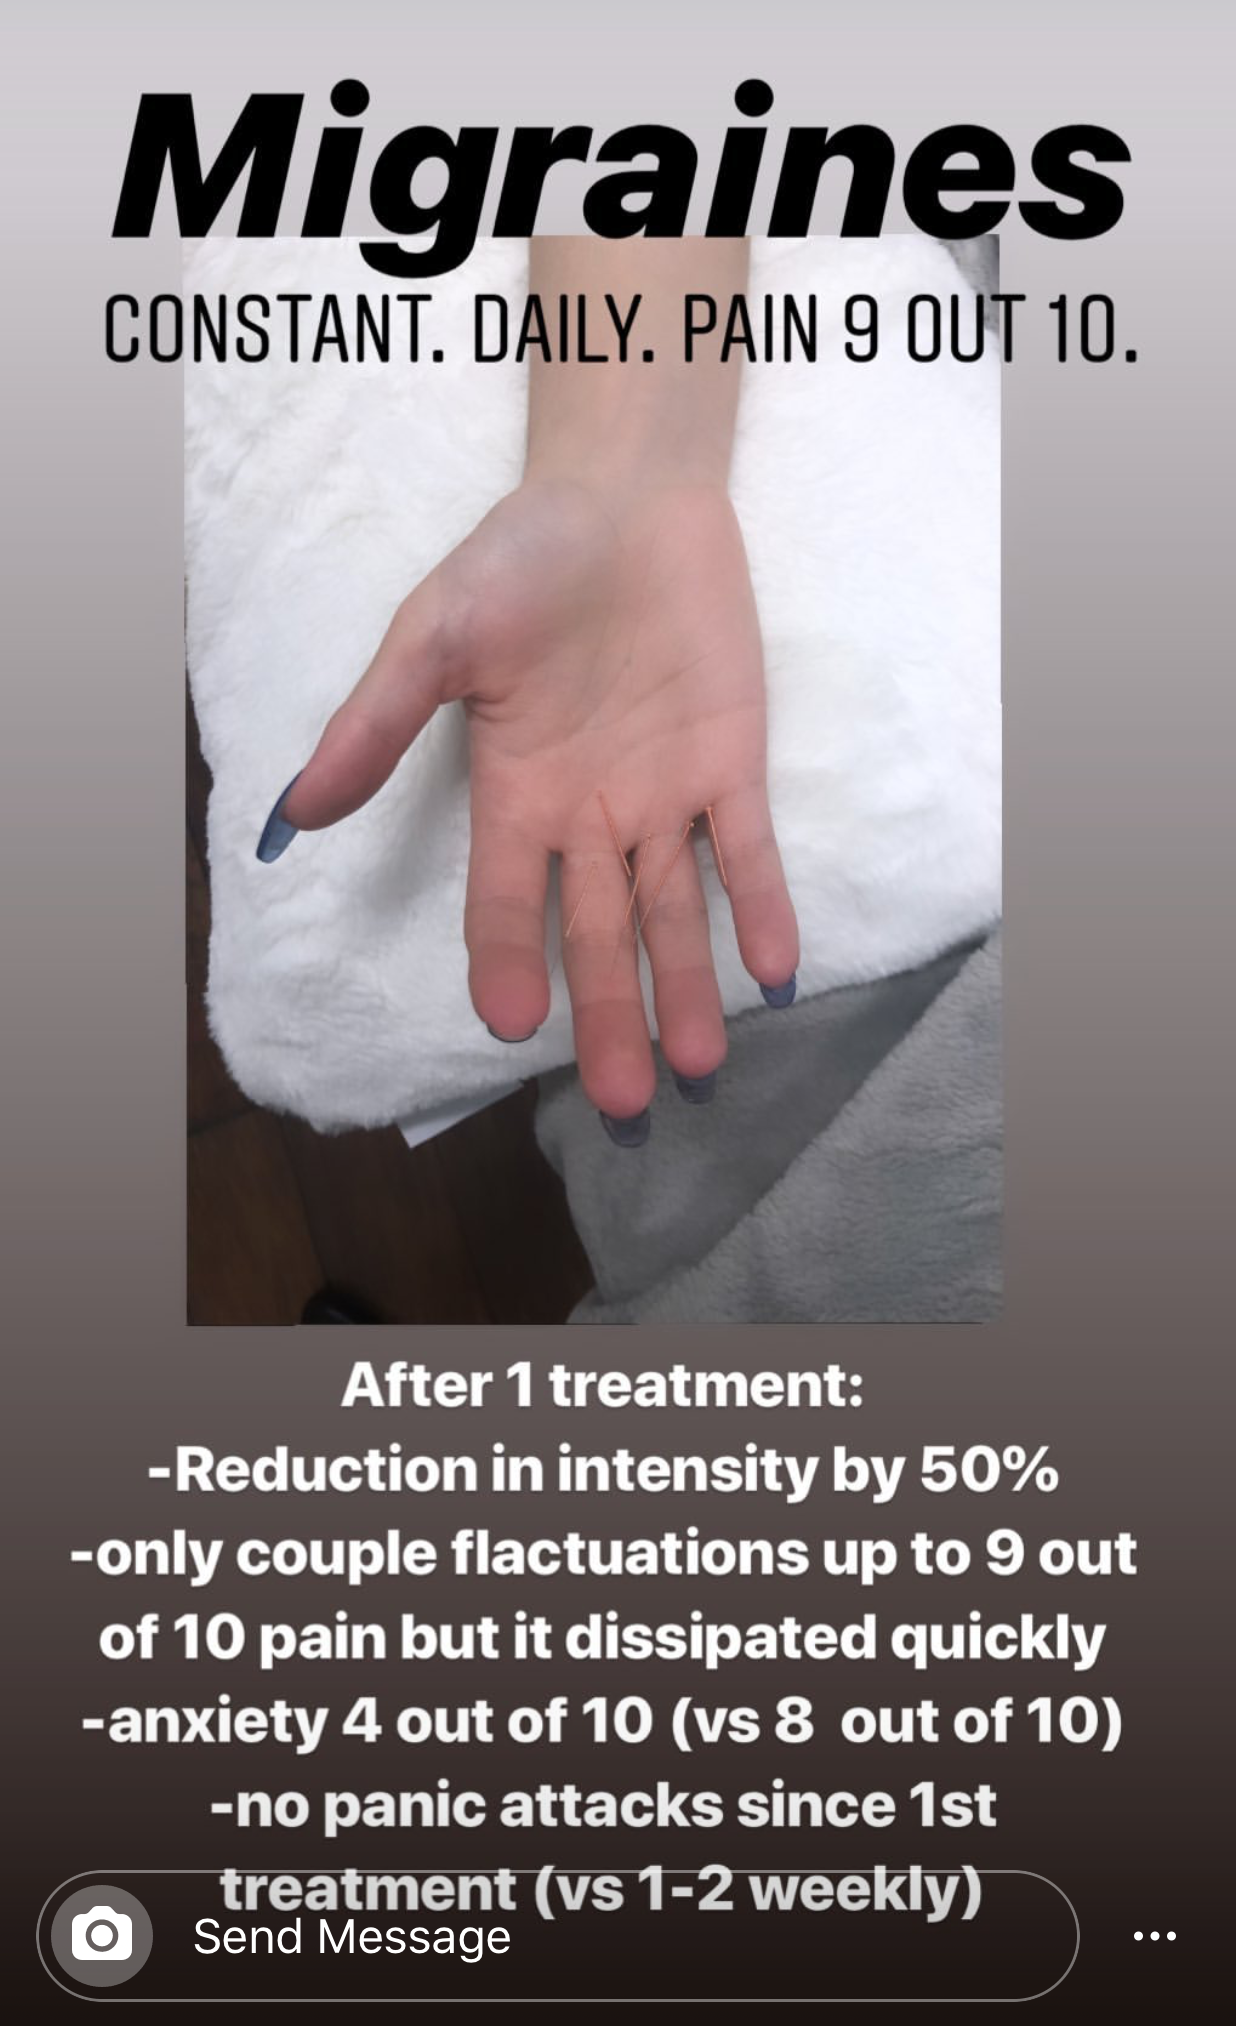  SuJok acupuncture used to treat migraines and related issues. Patient’s treatment resulted in a 50% drop in pain intensity and reduced panic/anxiety attacks in a week  